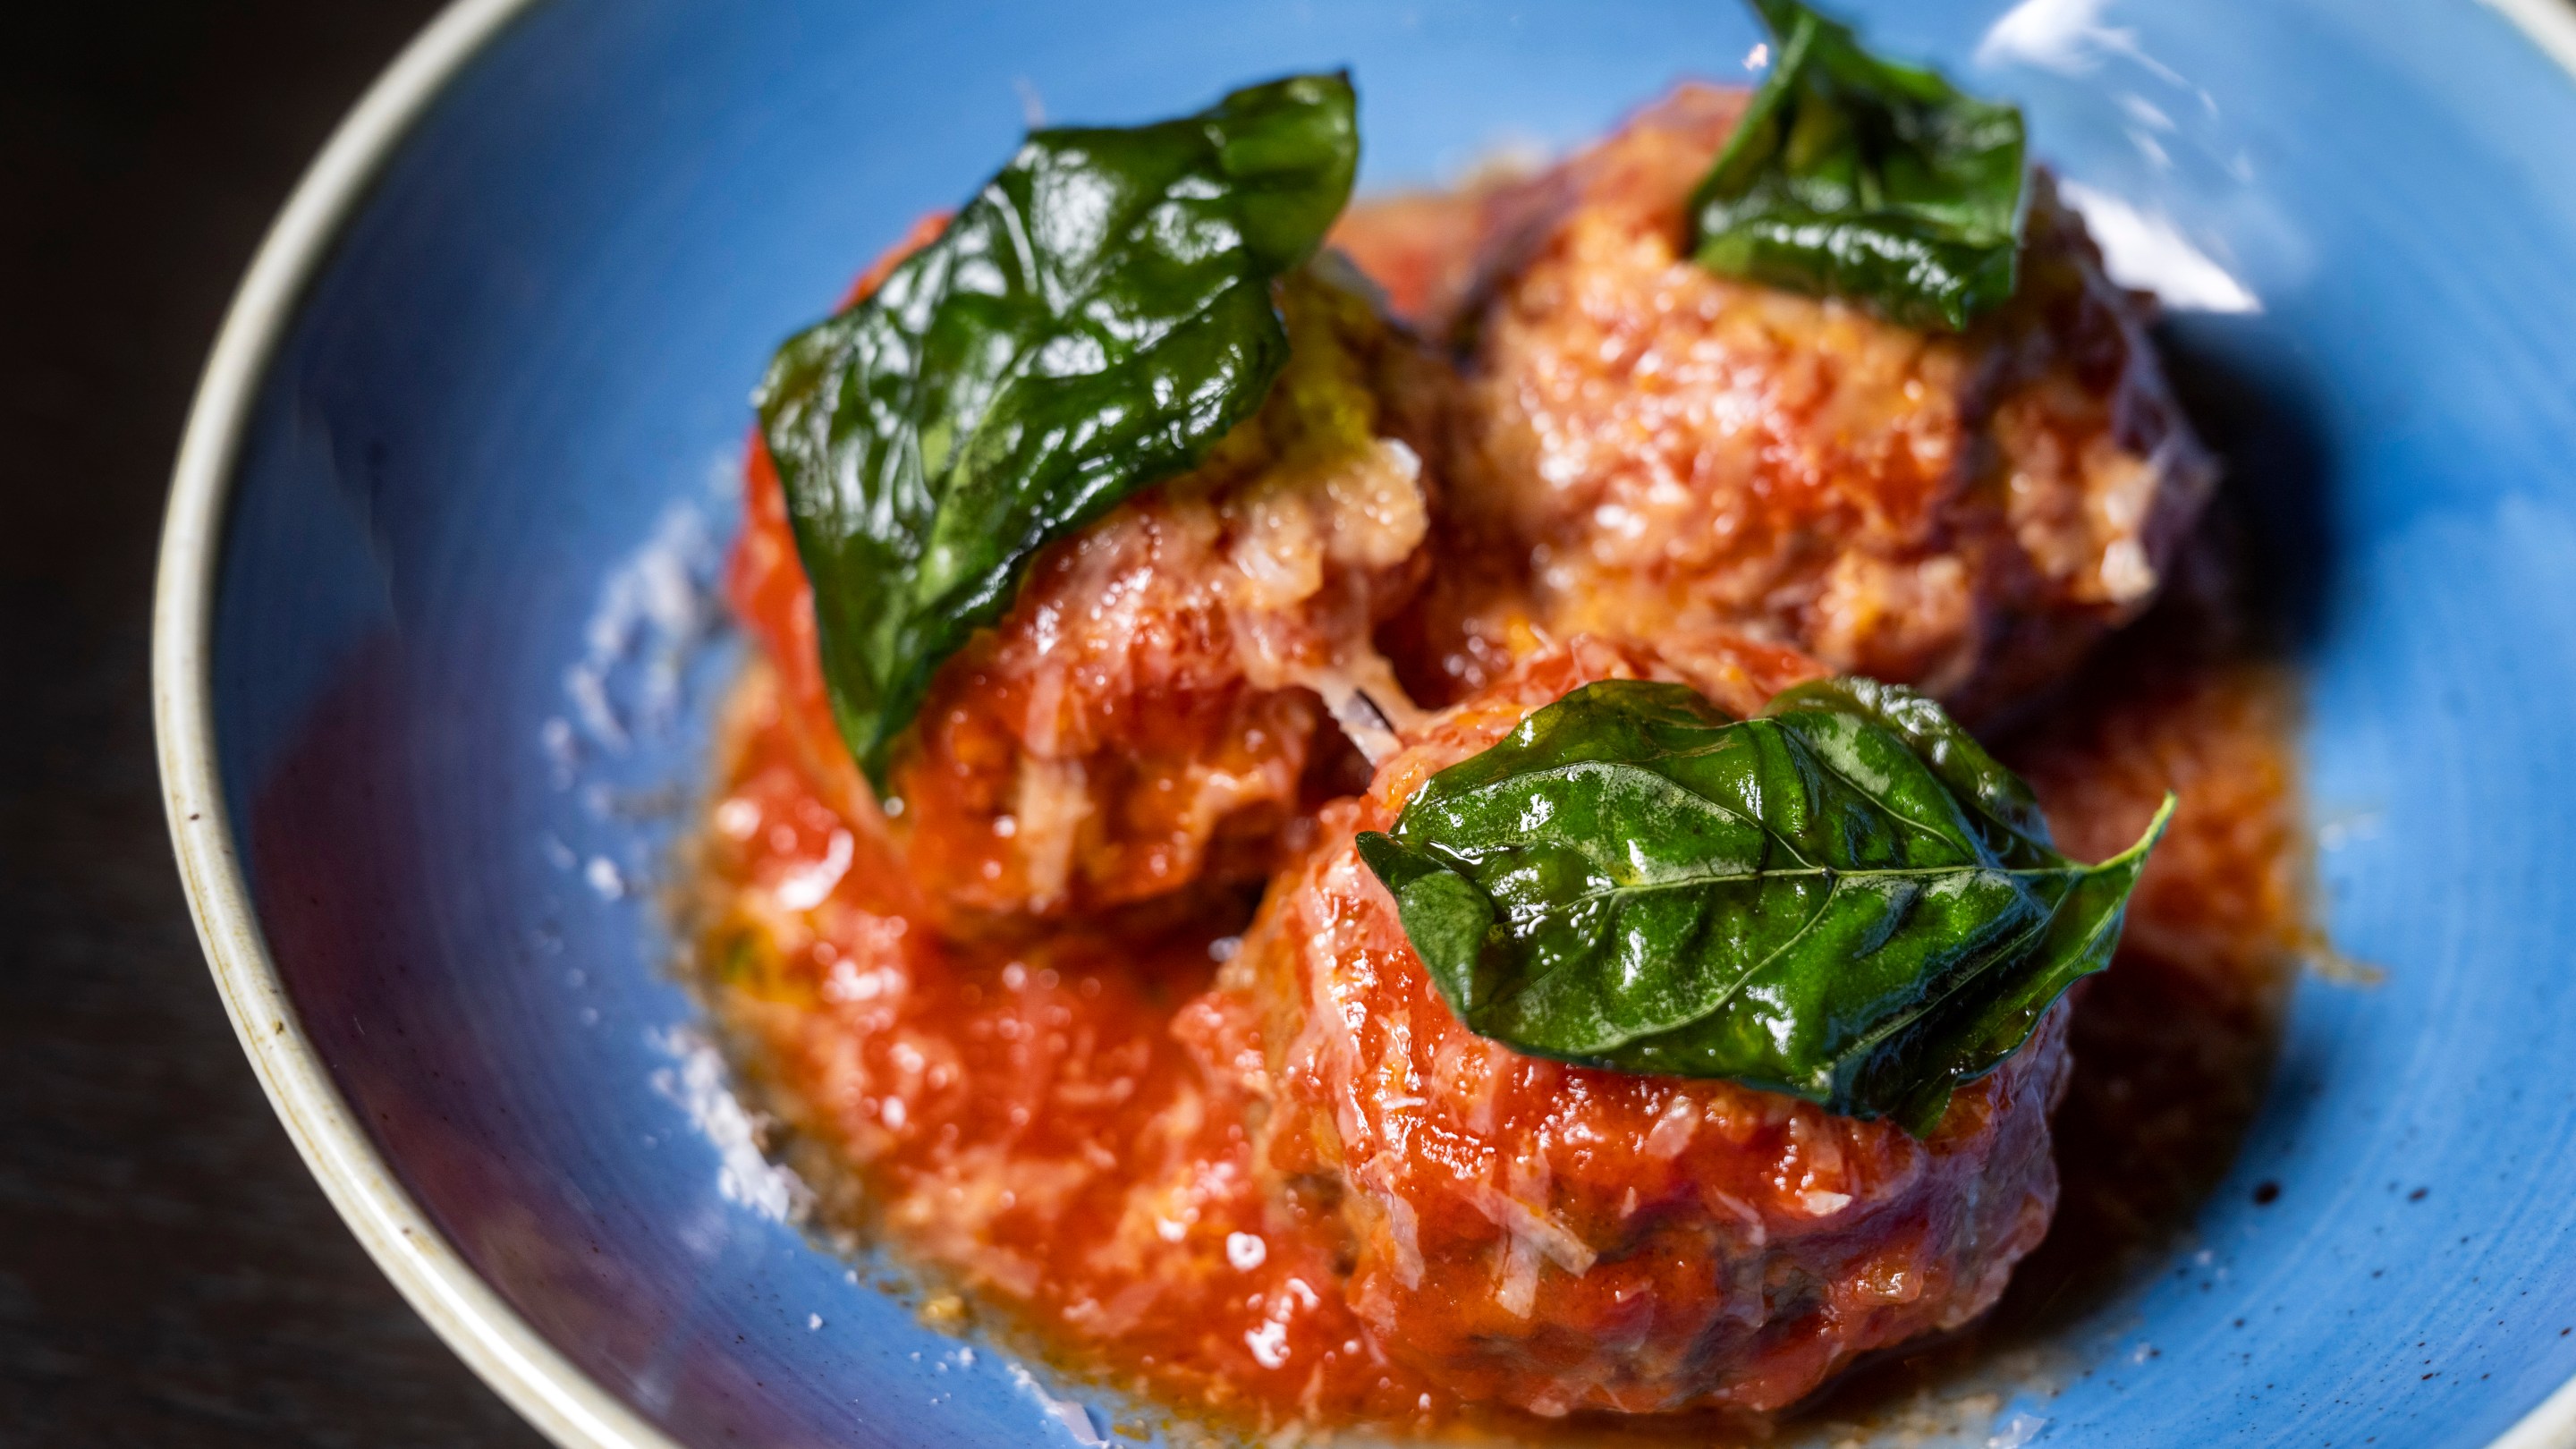 meatballs in red sauce